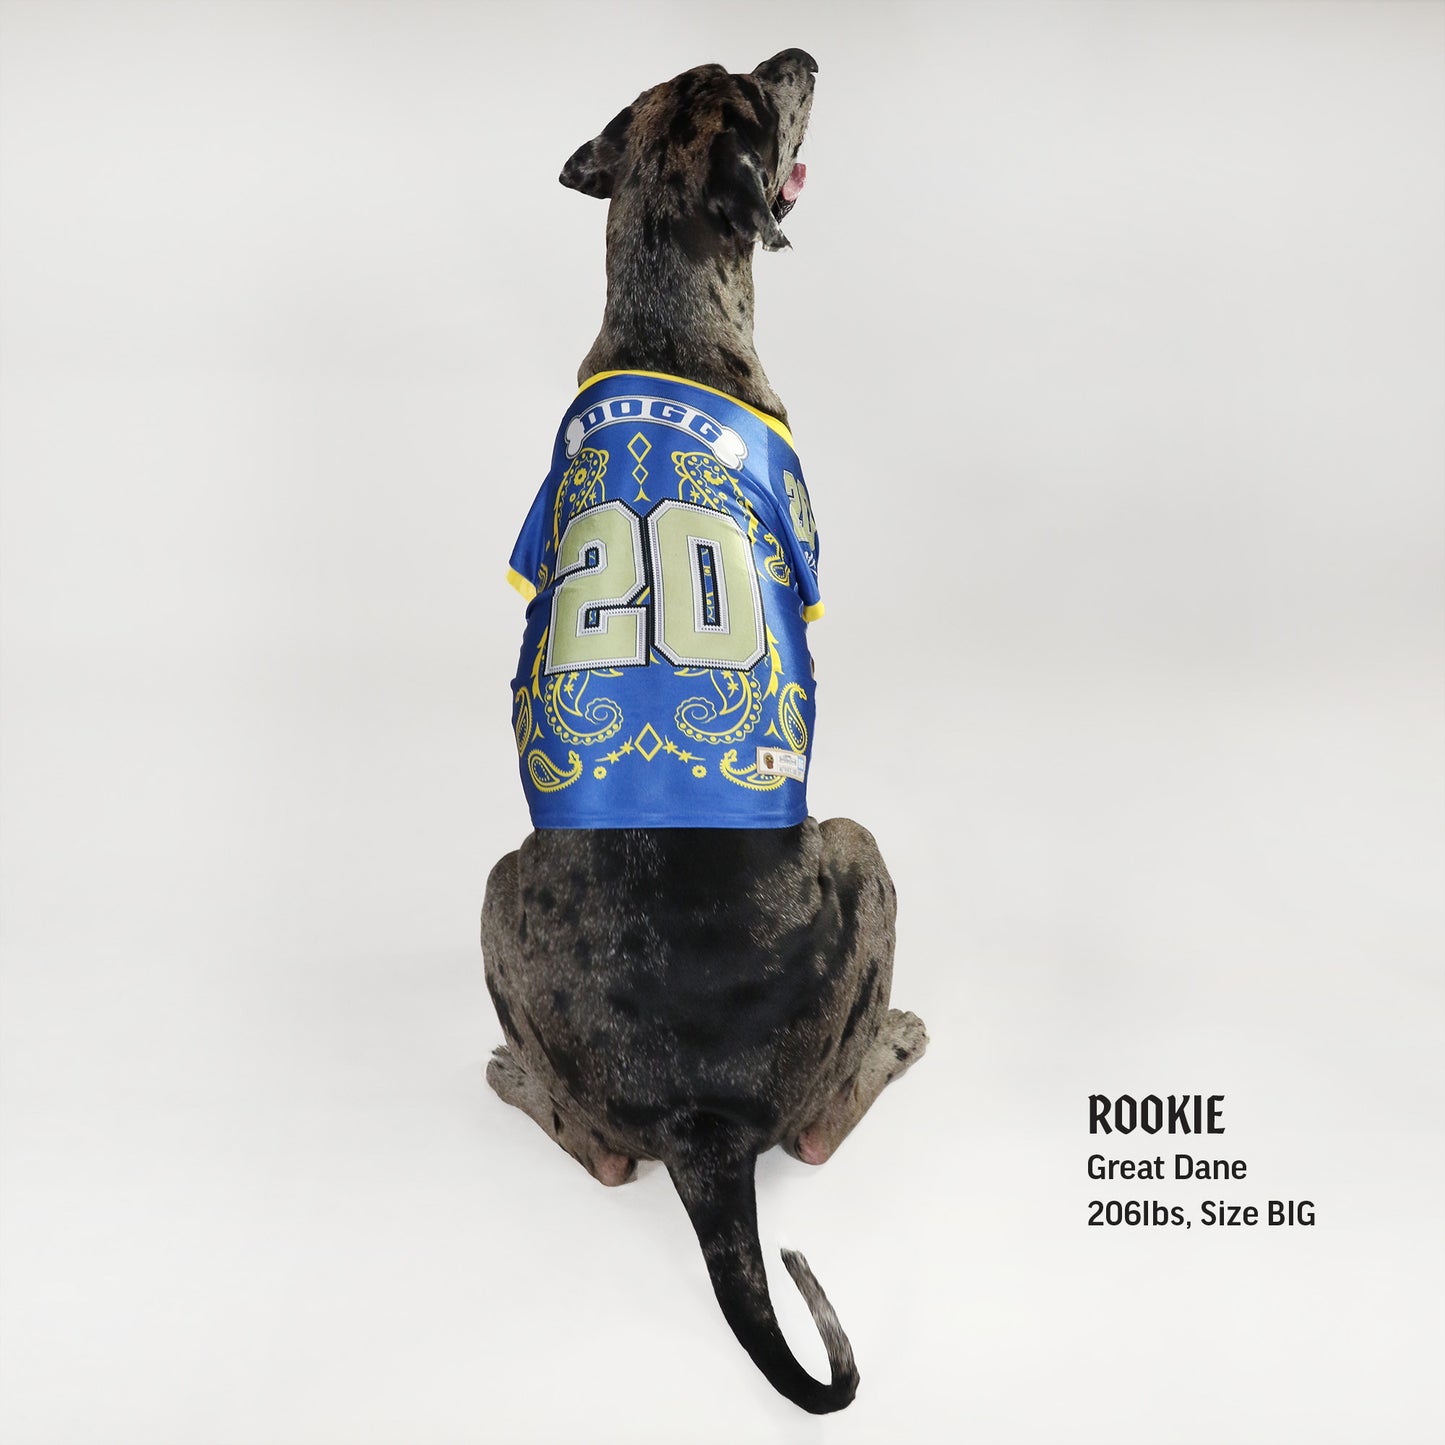 Rookie the Great Dane wearing the Halftime Deluxe Pet Jersey in size Big.